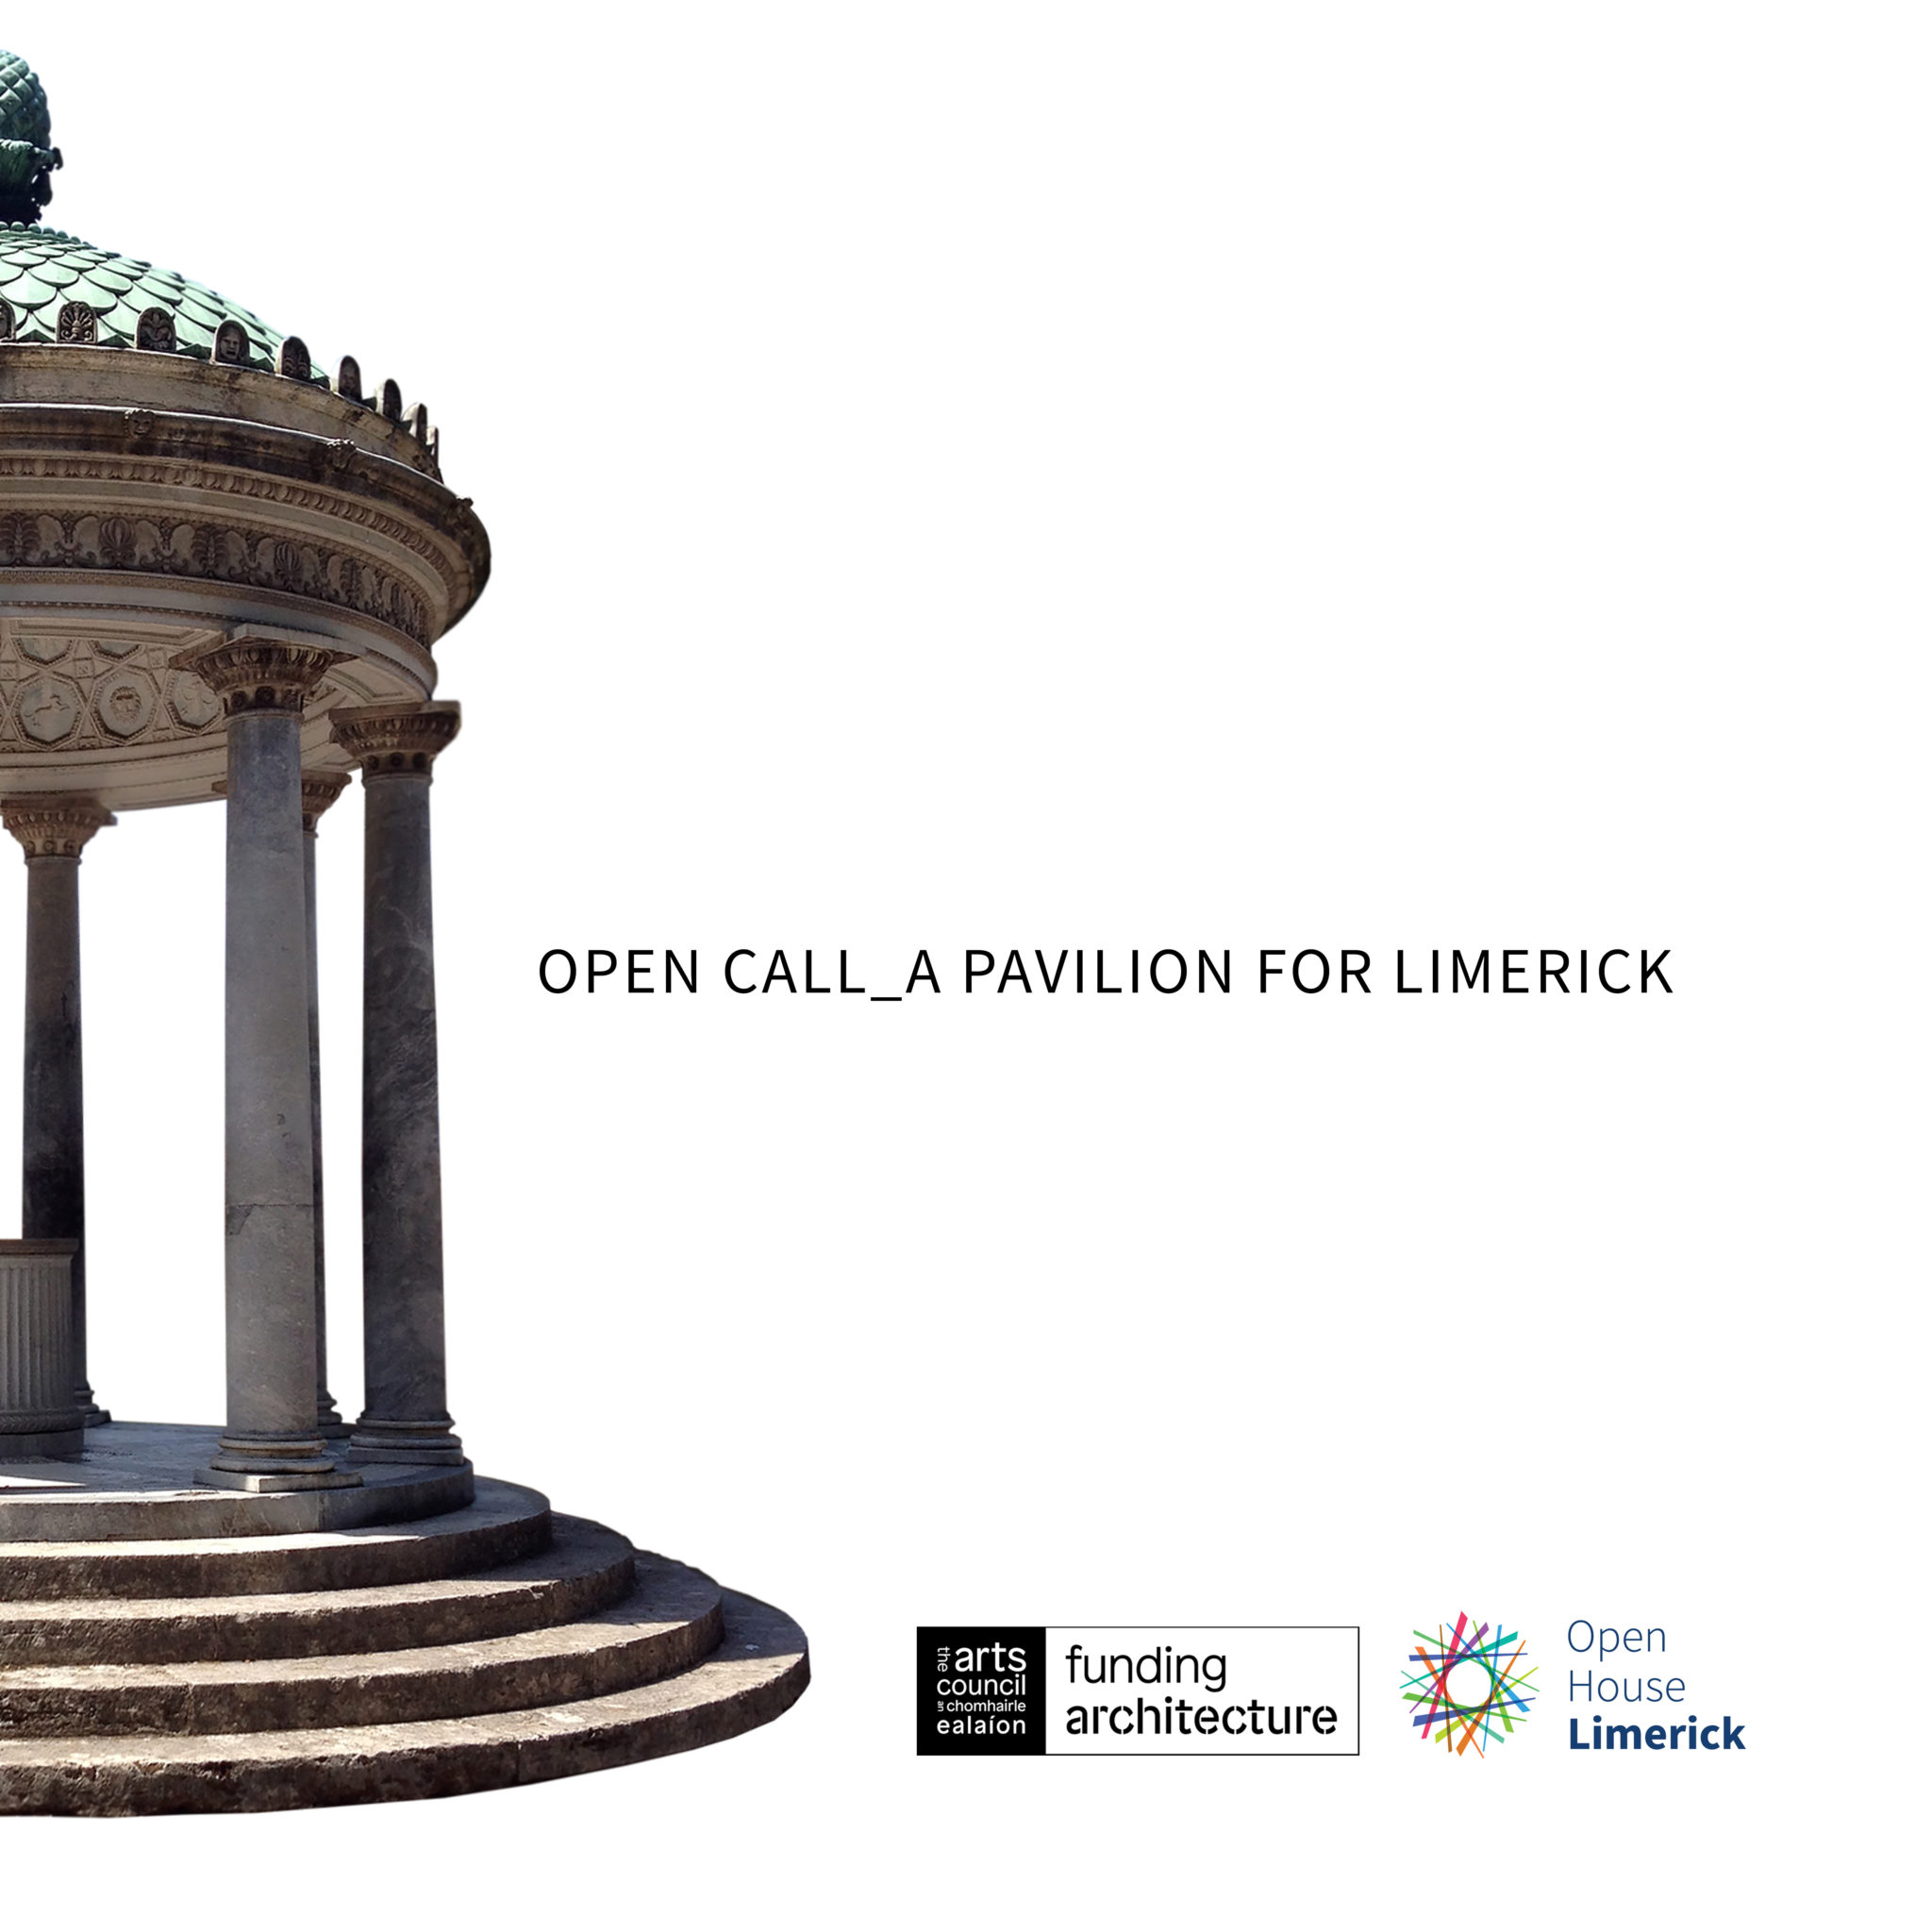 Open call: a pavilion for Limerick